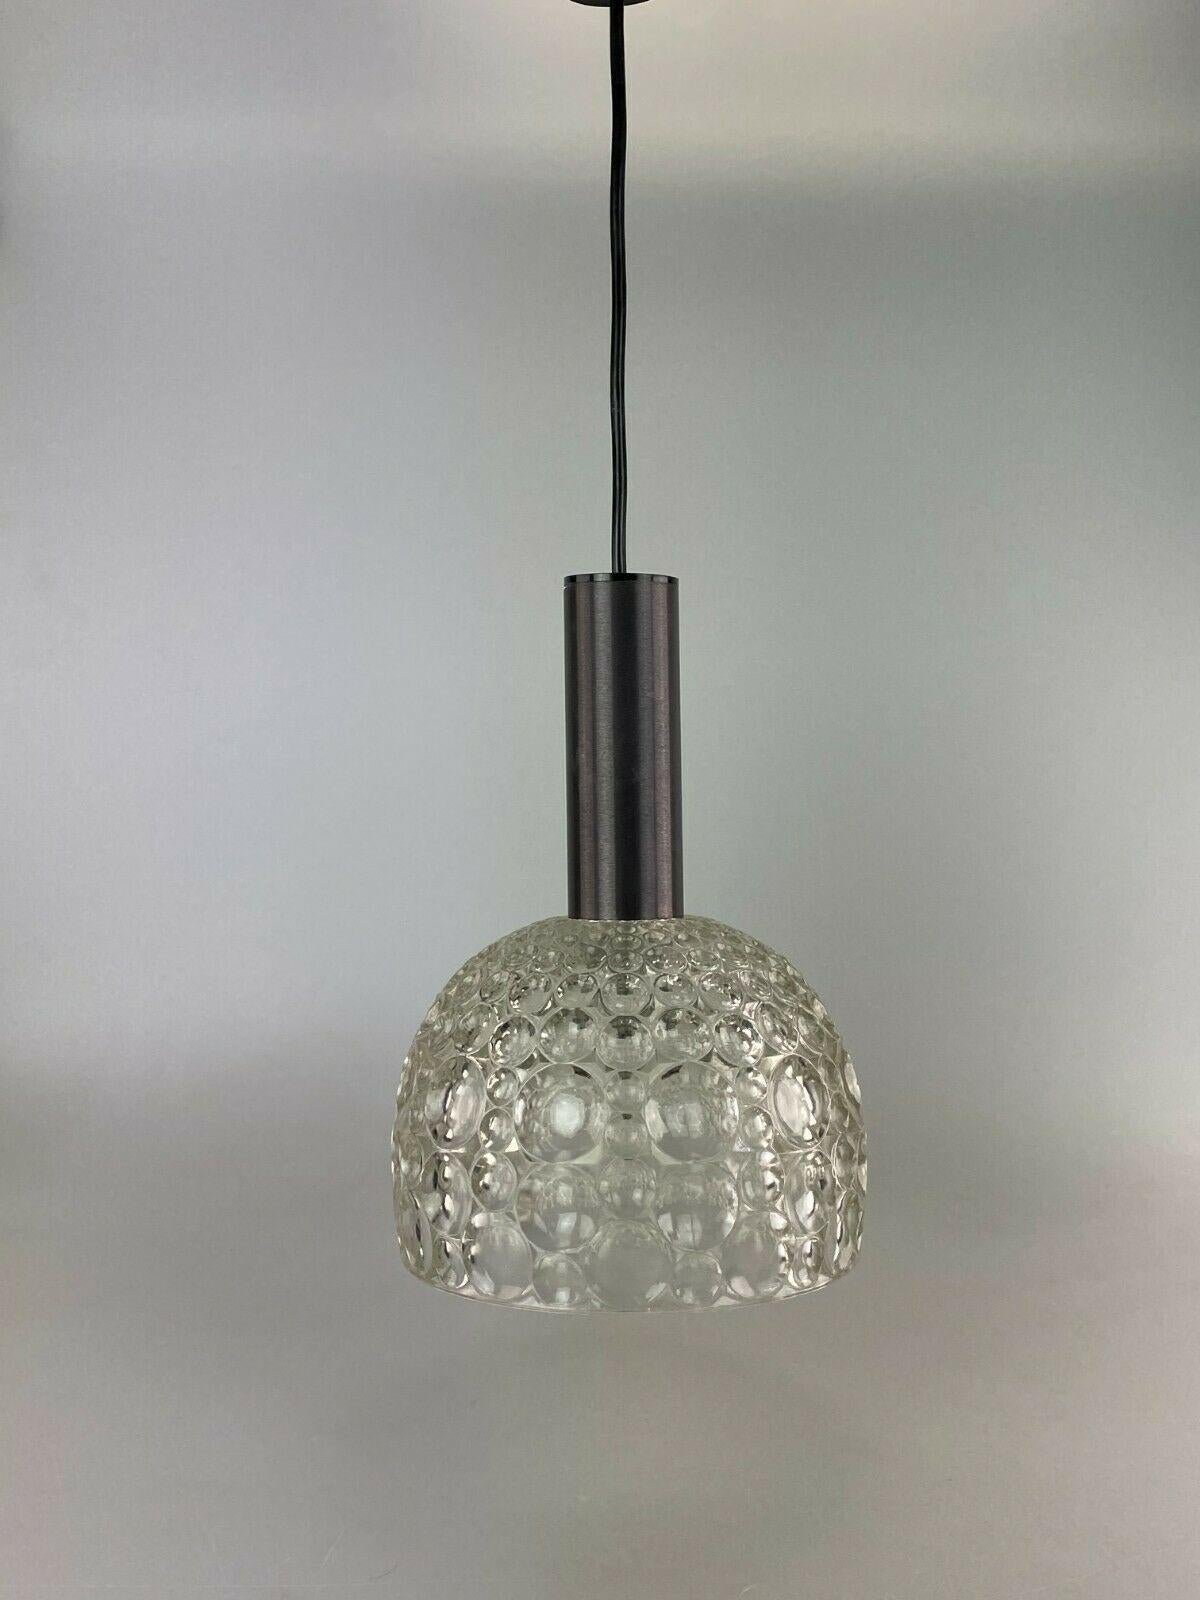 German 60s 70s Lamp Light Hanging Lamp Glass Ceiling Lamp Space Age Design For Sale